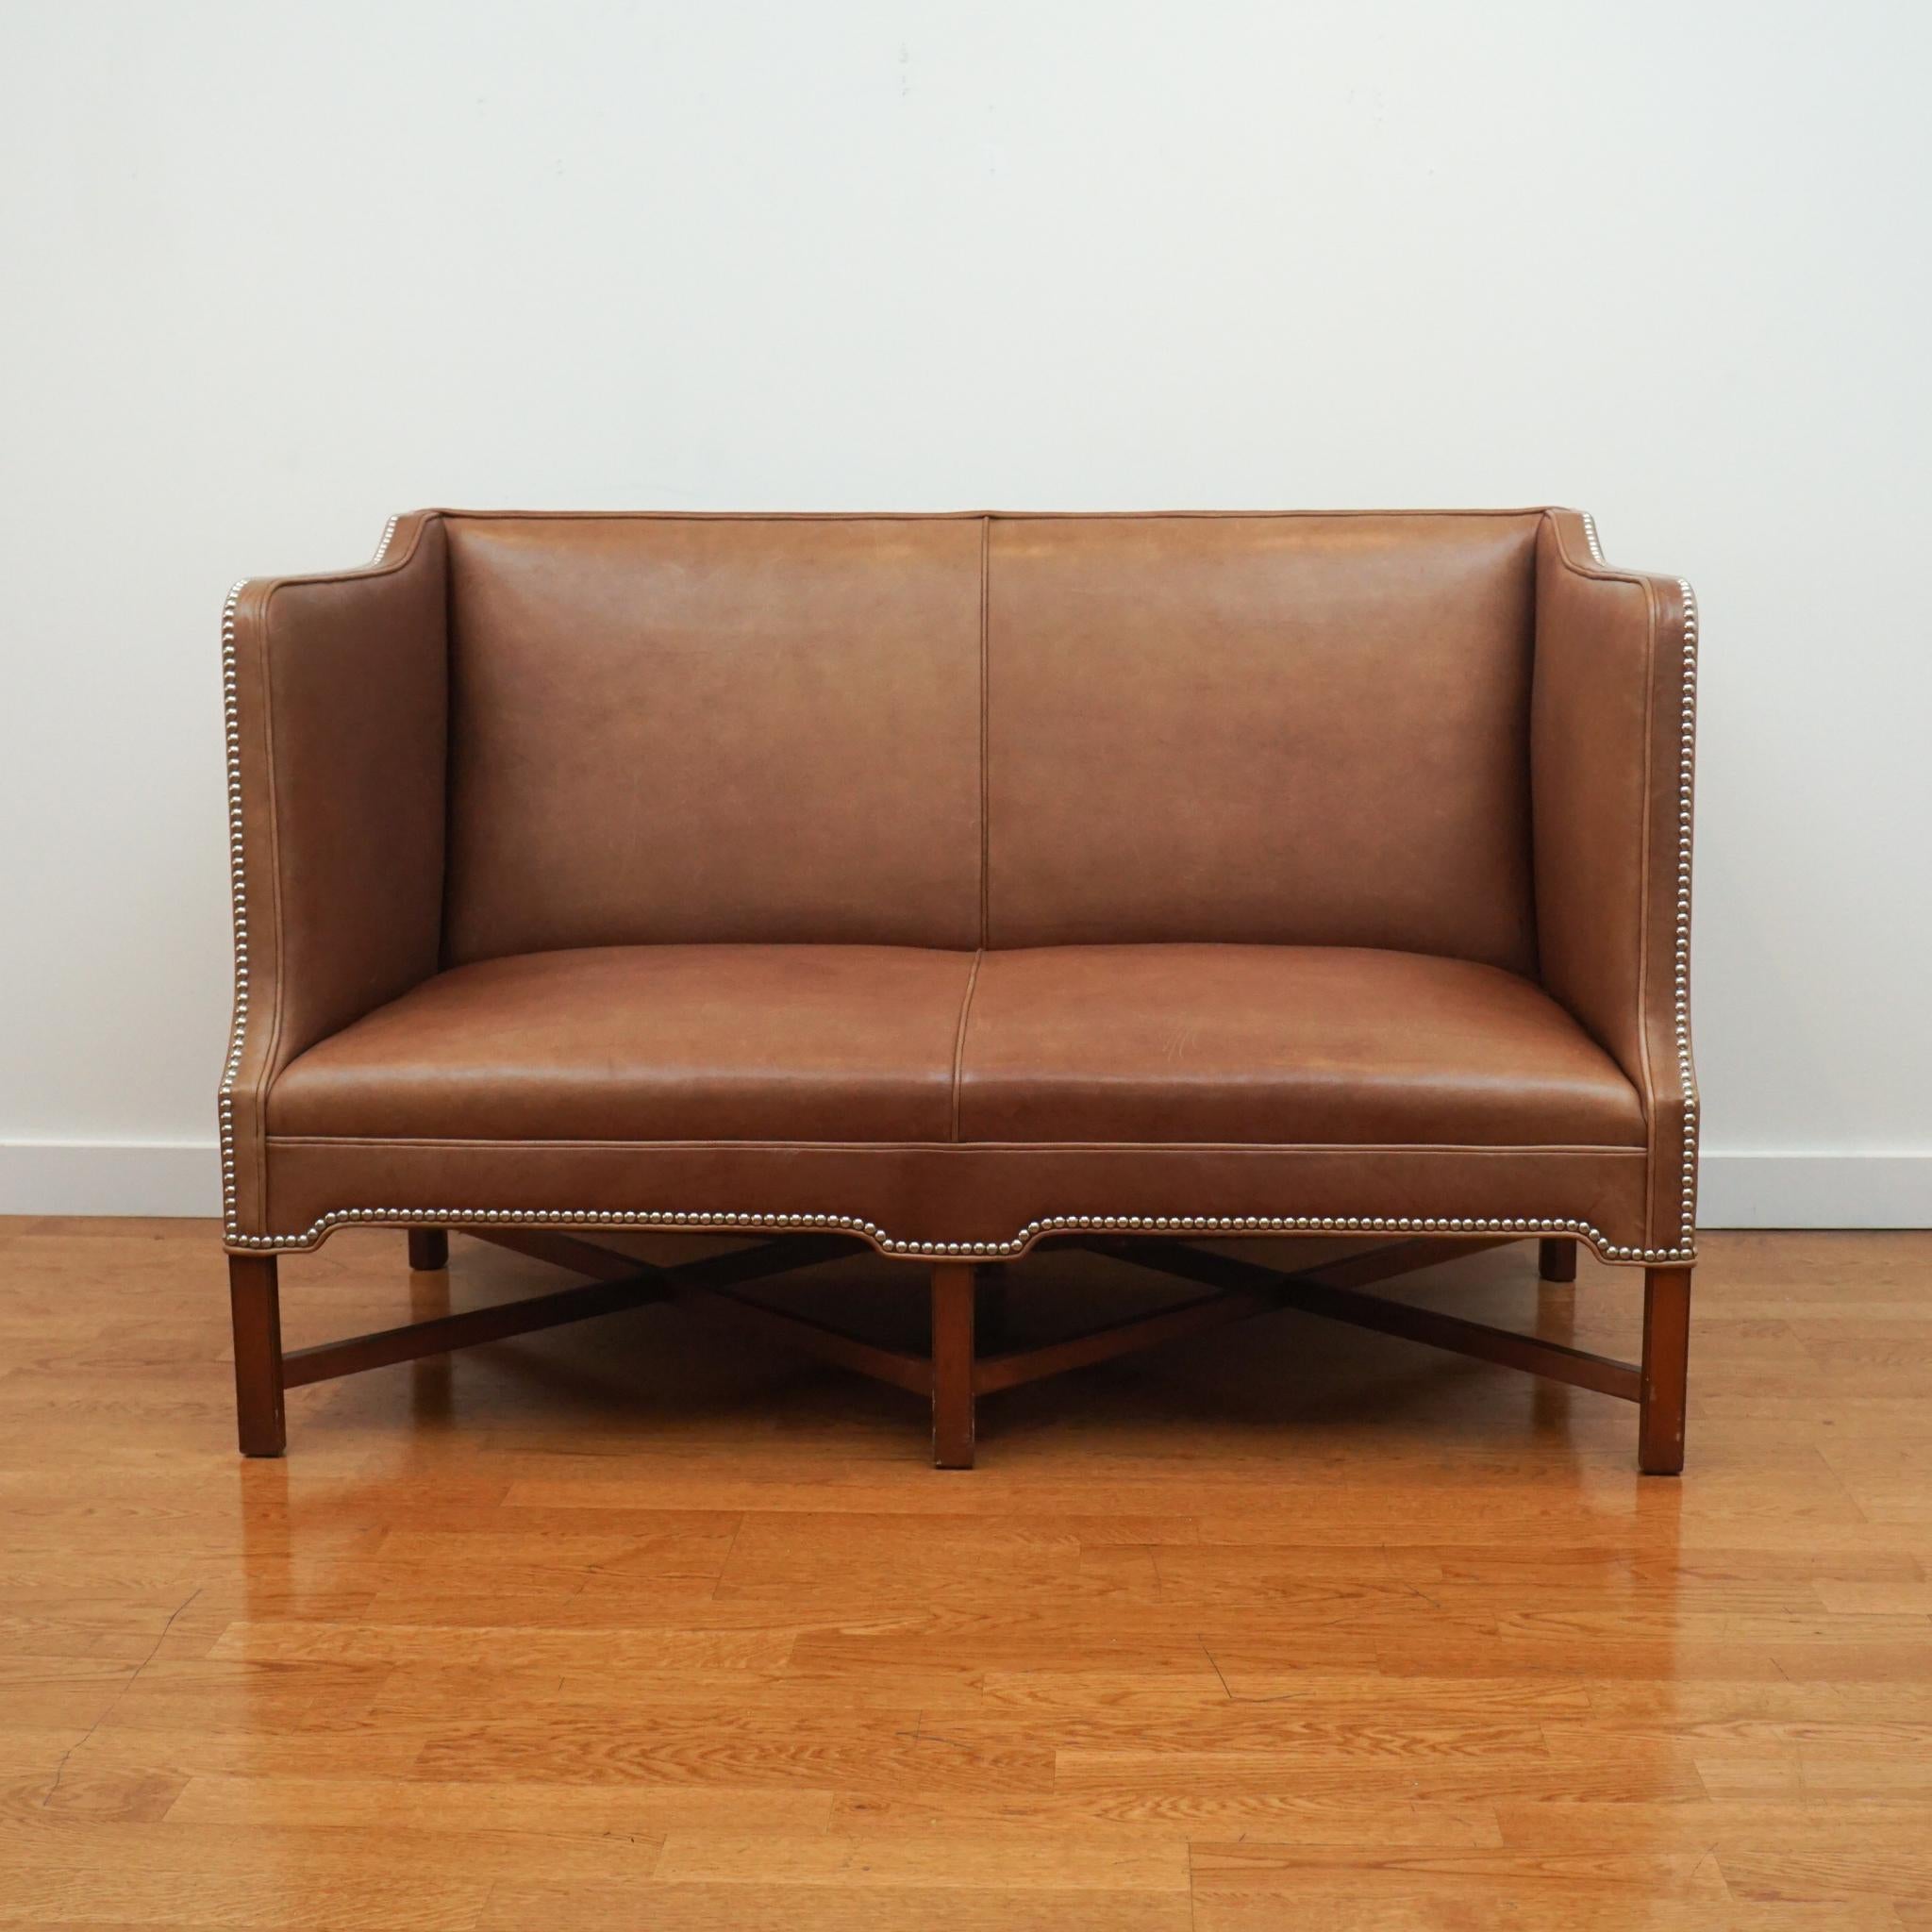 This Kaare Klint-style leather sofa is a compact, two-seater version of a design that was created for the Danish Prime Minister’s office in 1930. Featuring high side arms, deep seat and exposed, cross legged mahogany frame, the tight seat and back